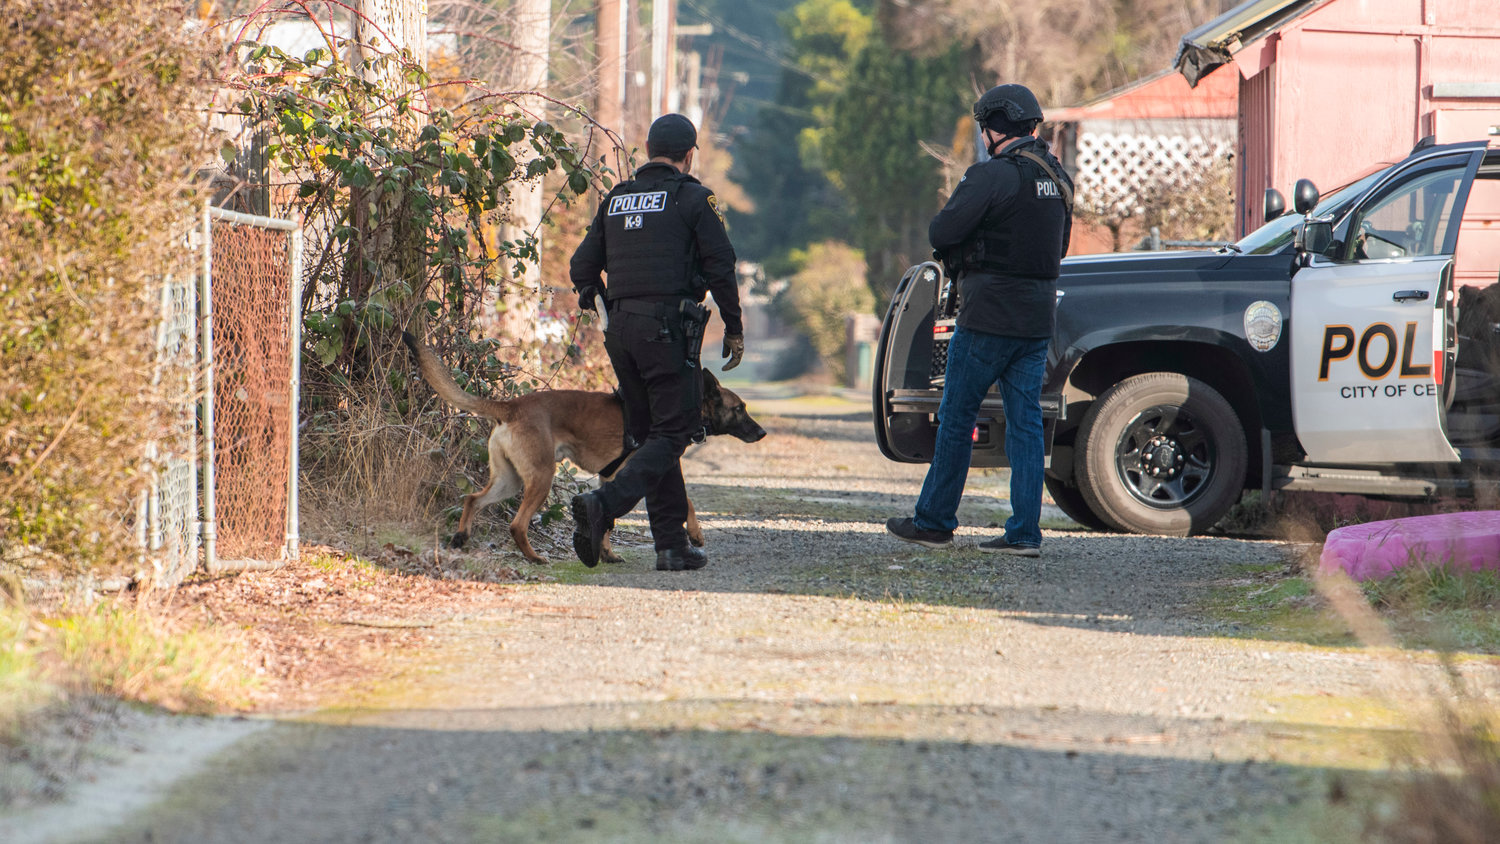 Centralia Police K9 Unit Officer Ruben Ramirez walks his dog around the scene of an active situation where a man barricaded himself in a building along Windsor Avenue in Centralia on Thursday.